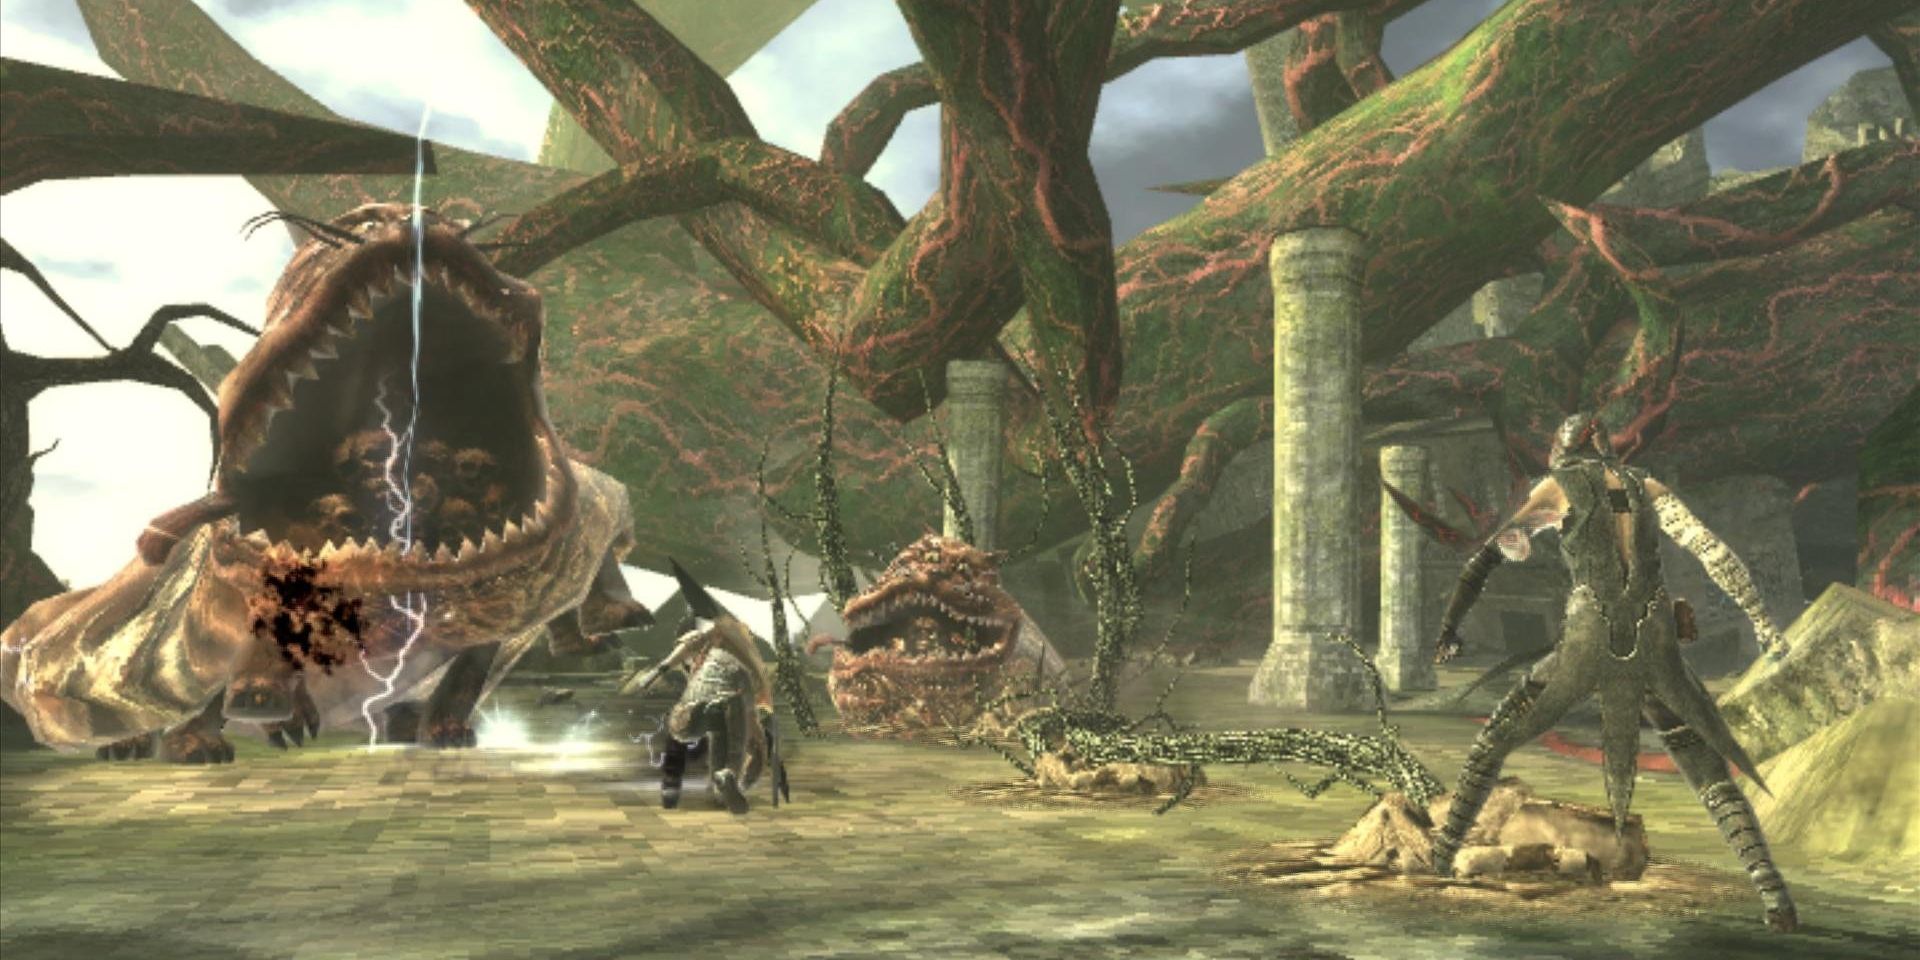 The player encountering enemies in Soul Sacrifice